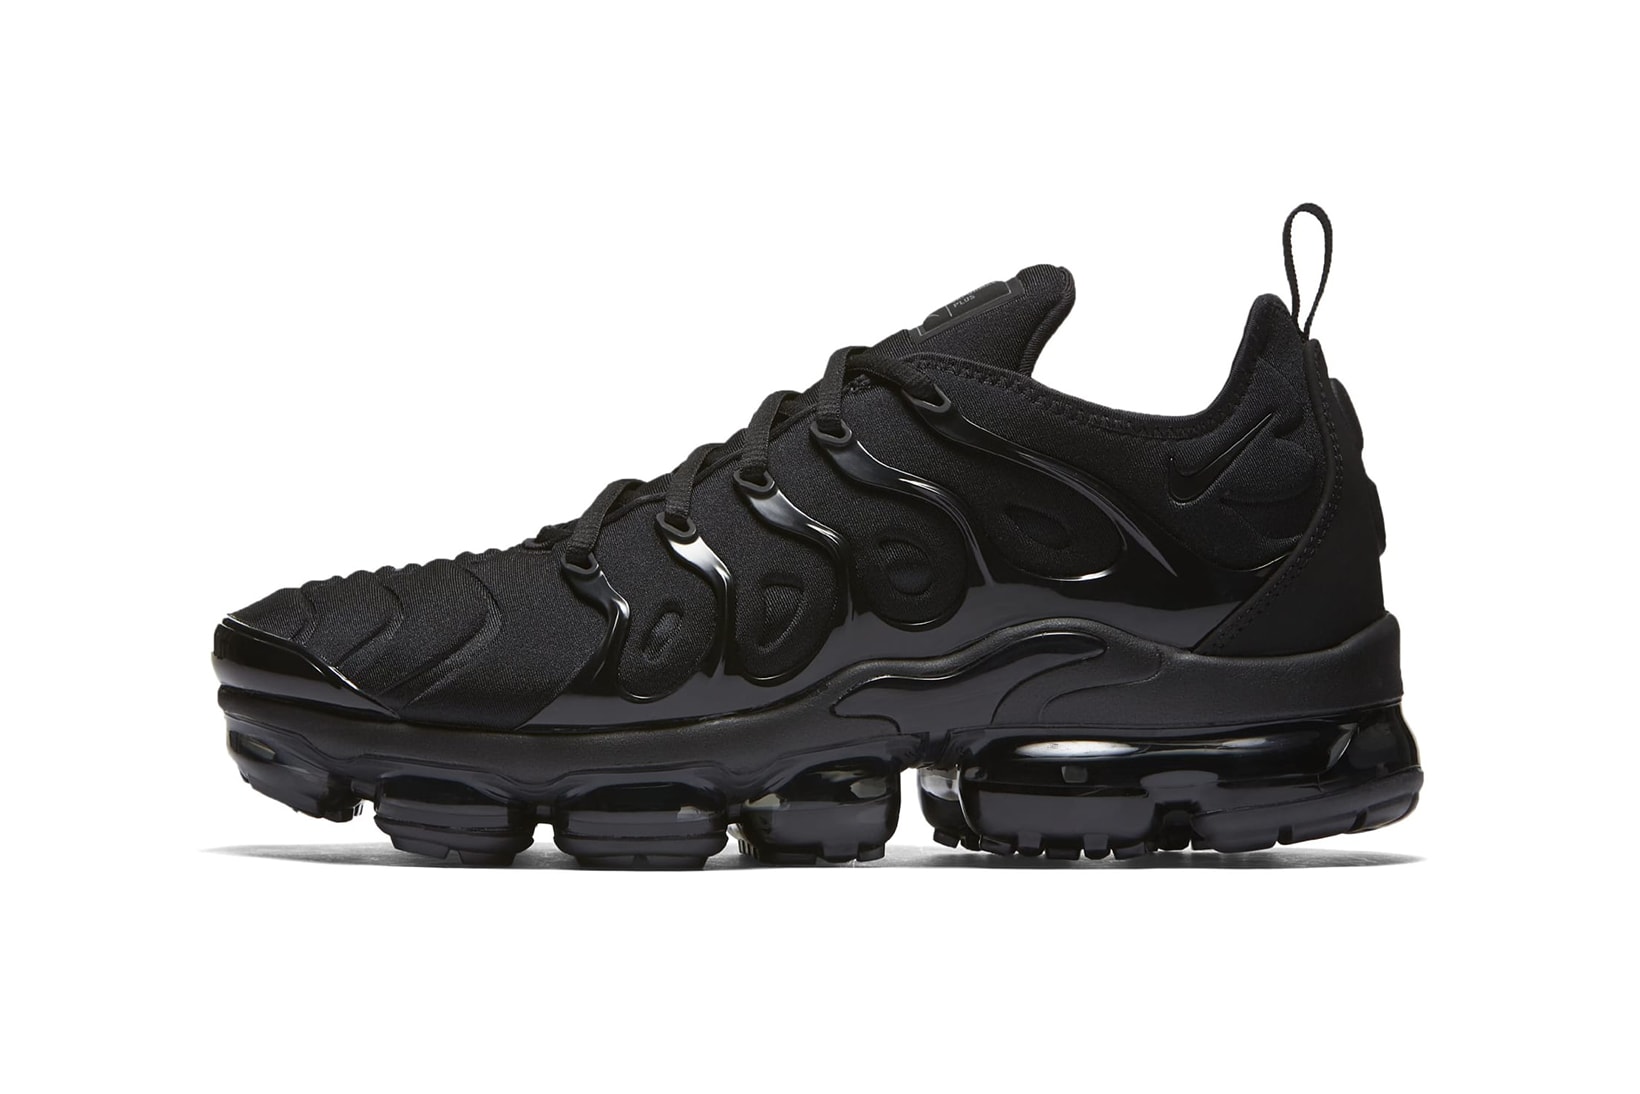 Nike Air Vapormax Plus Triple Black 2018 January 25 Release Date Info Official Images footwear sneakers shoes